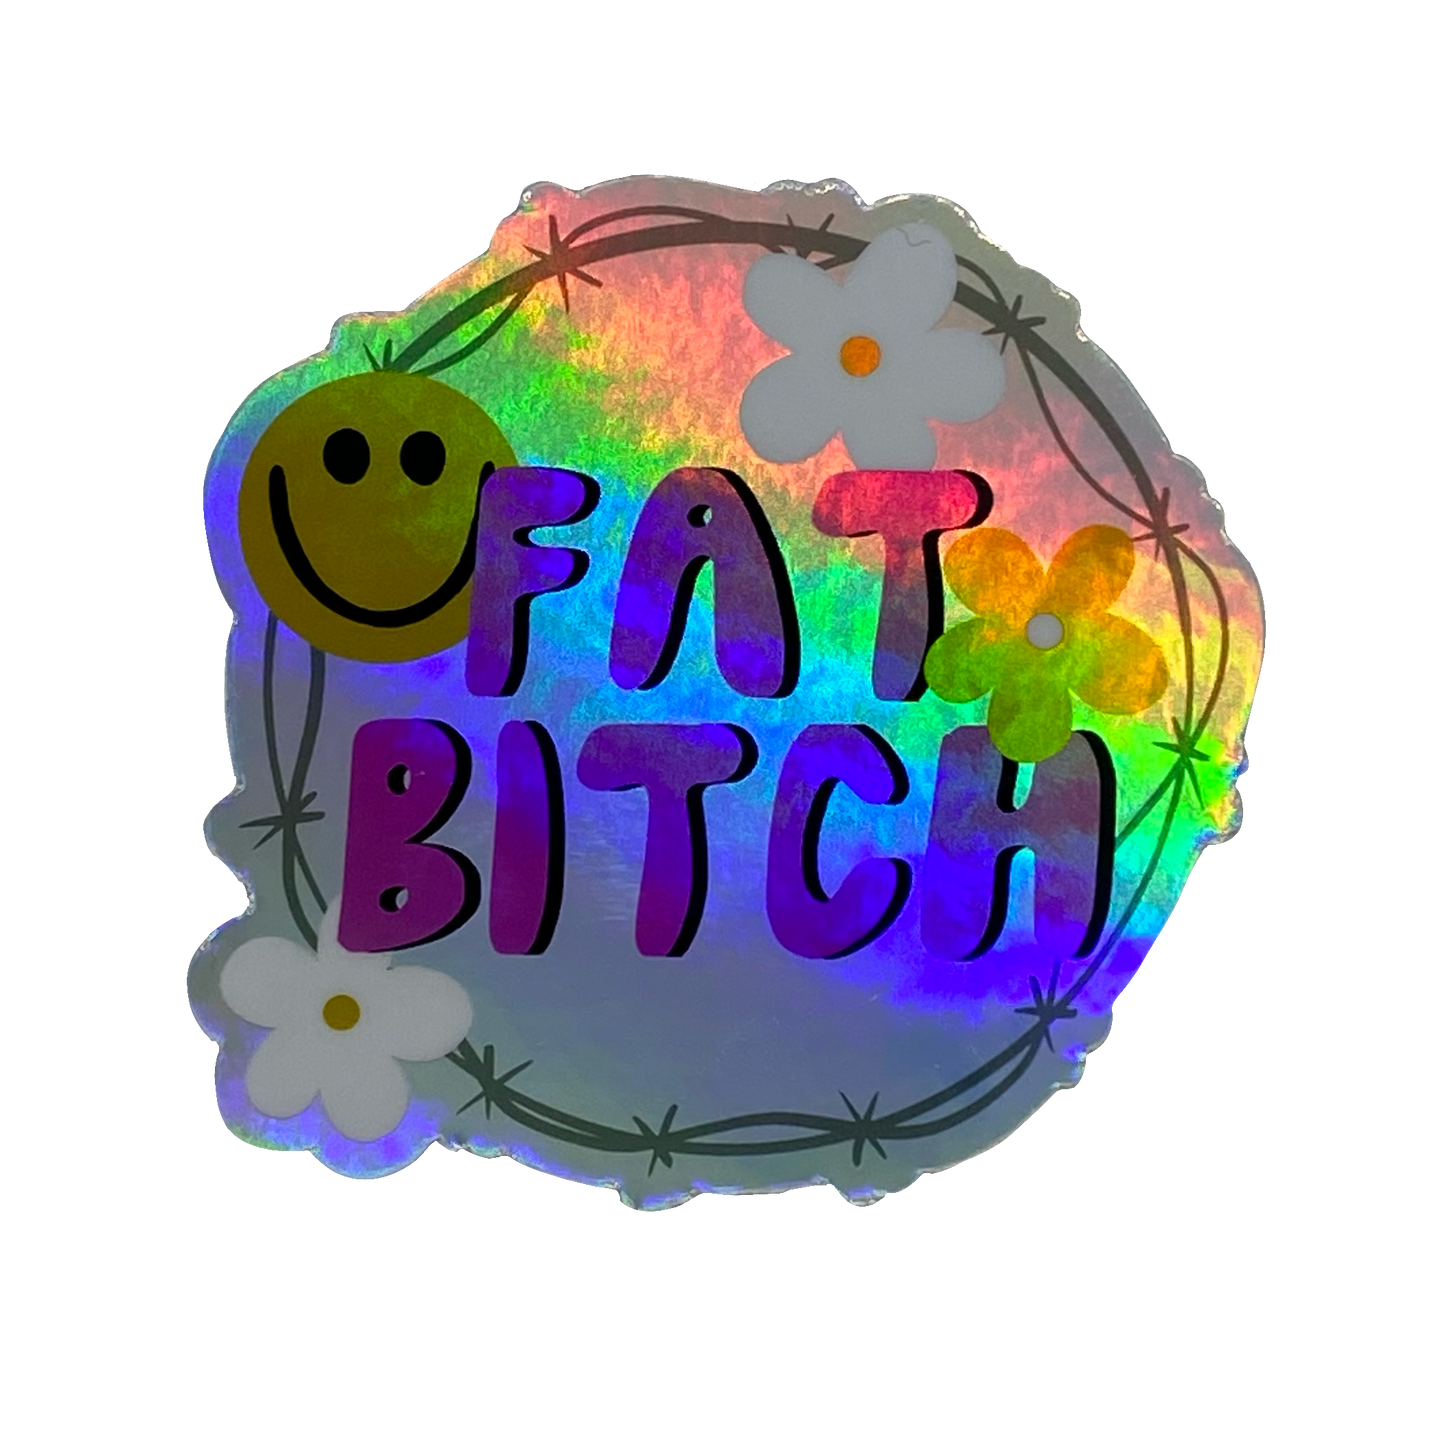 Stuff by Chelsey - Fat Bitch Holographic Sticker